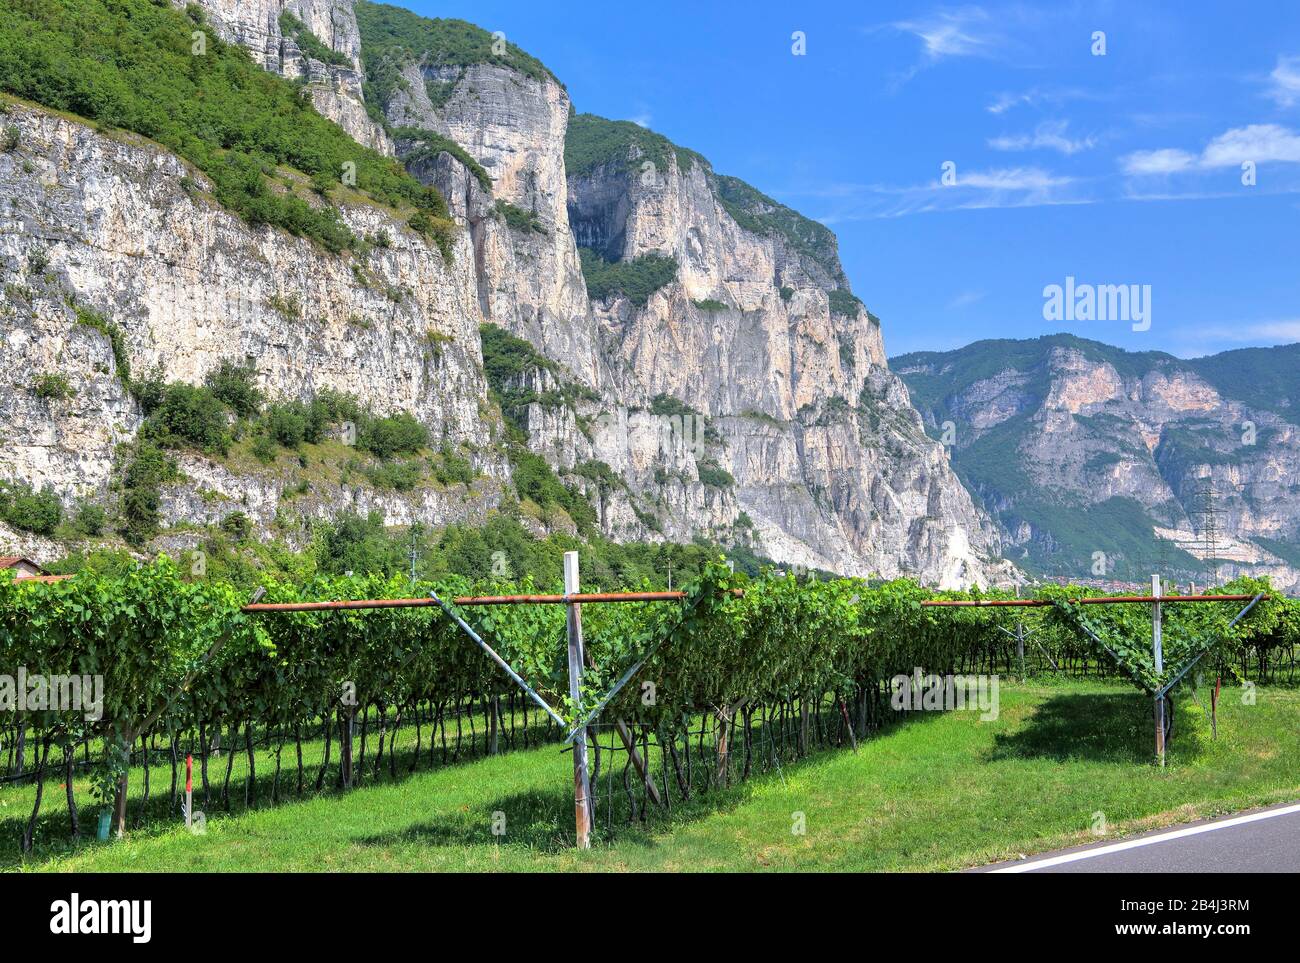 Vineyards under steep cliffs on the Trentino wine route in the Adige Valley near Rovere della Luna, Trentino, South Tyrol, Italy Stock Photo